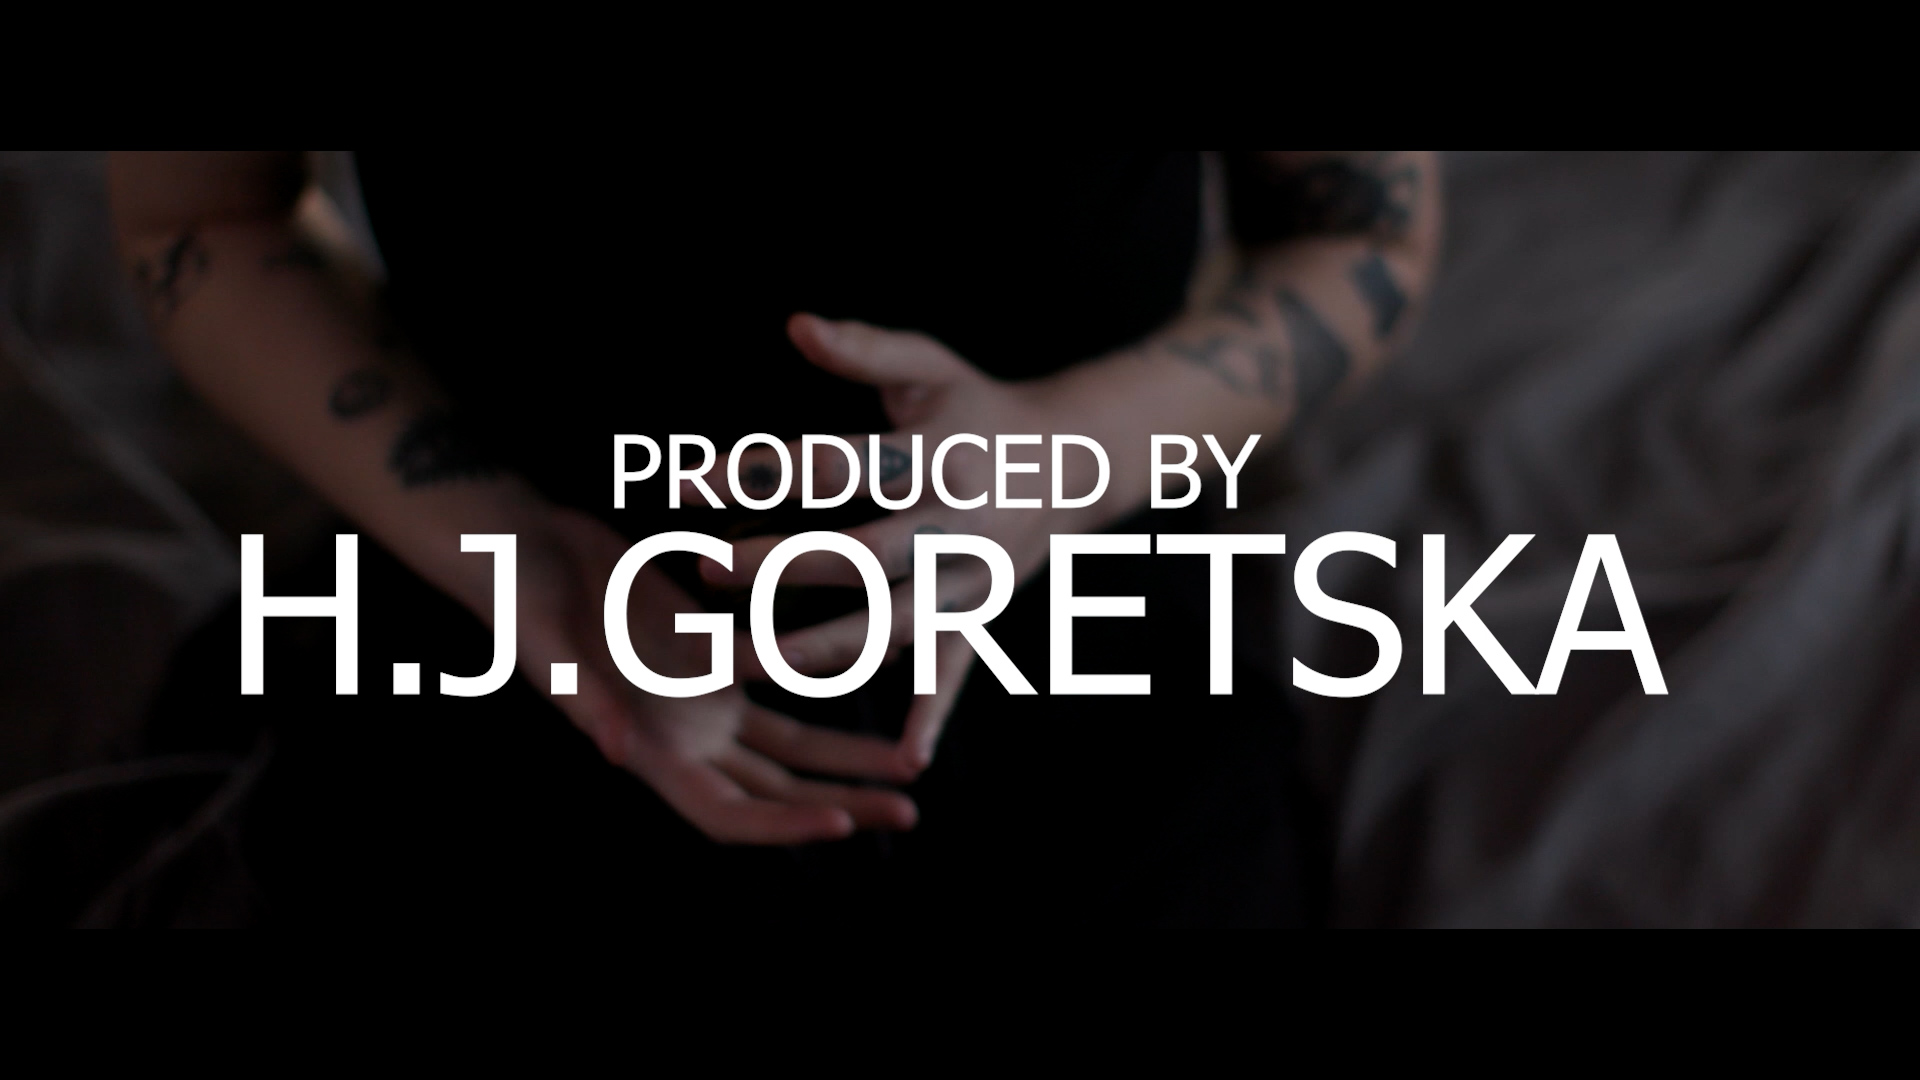 Image link to showreel by Holly Goretska, showing the range of final films she produced during her final project. Image shows the arms of a character with the title Produced by H.J. Goretska